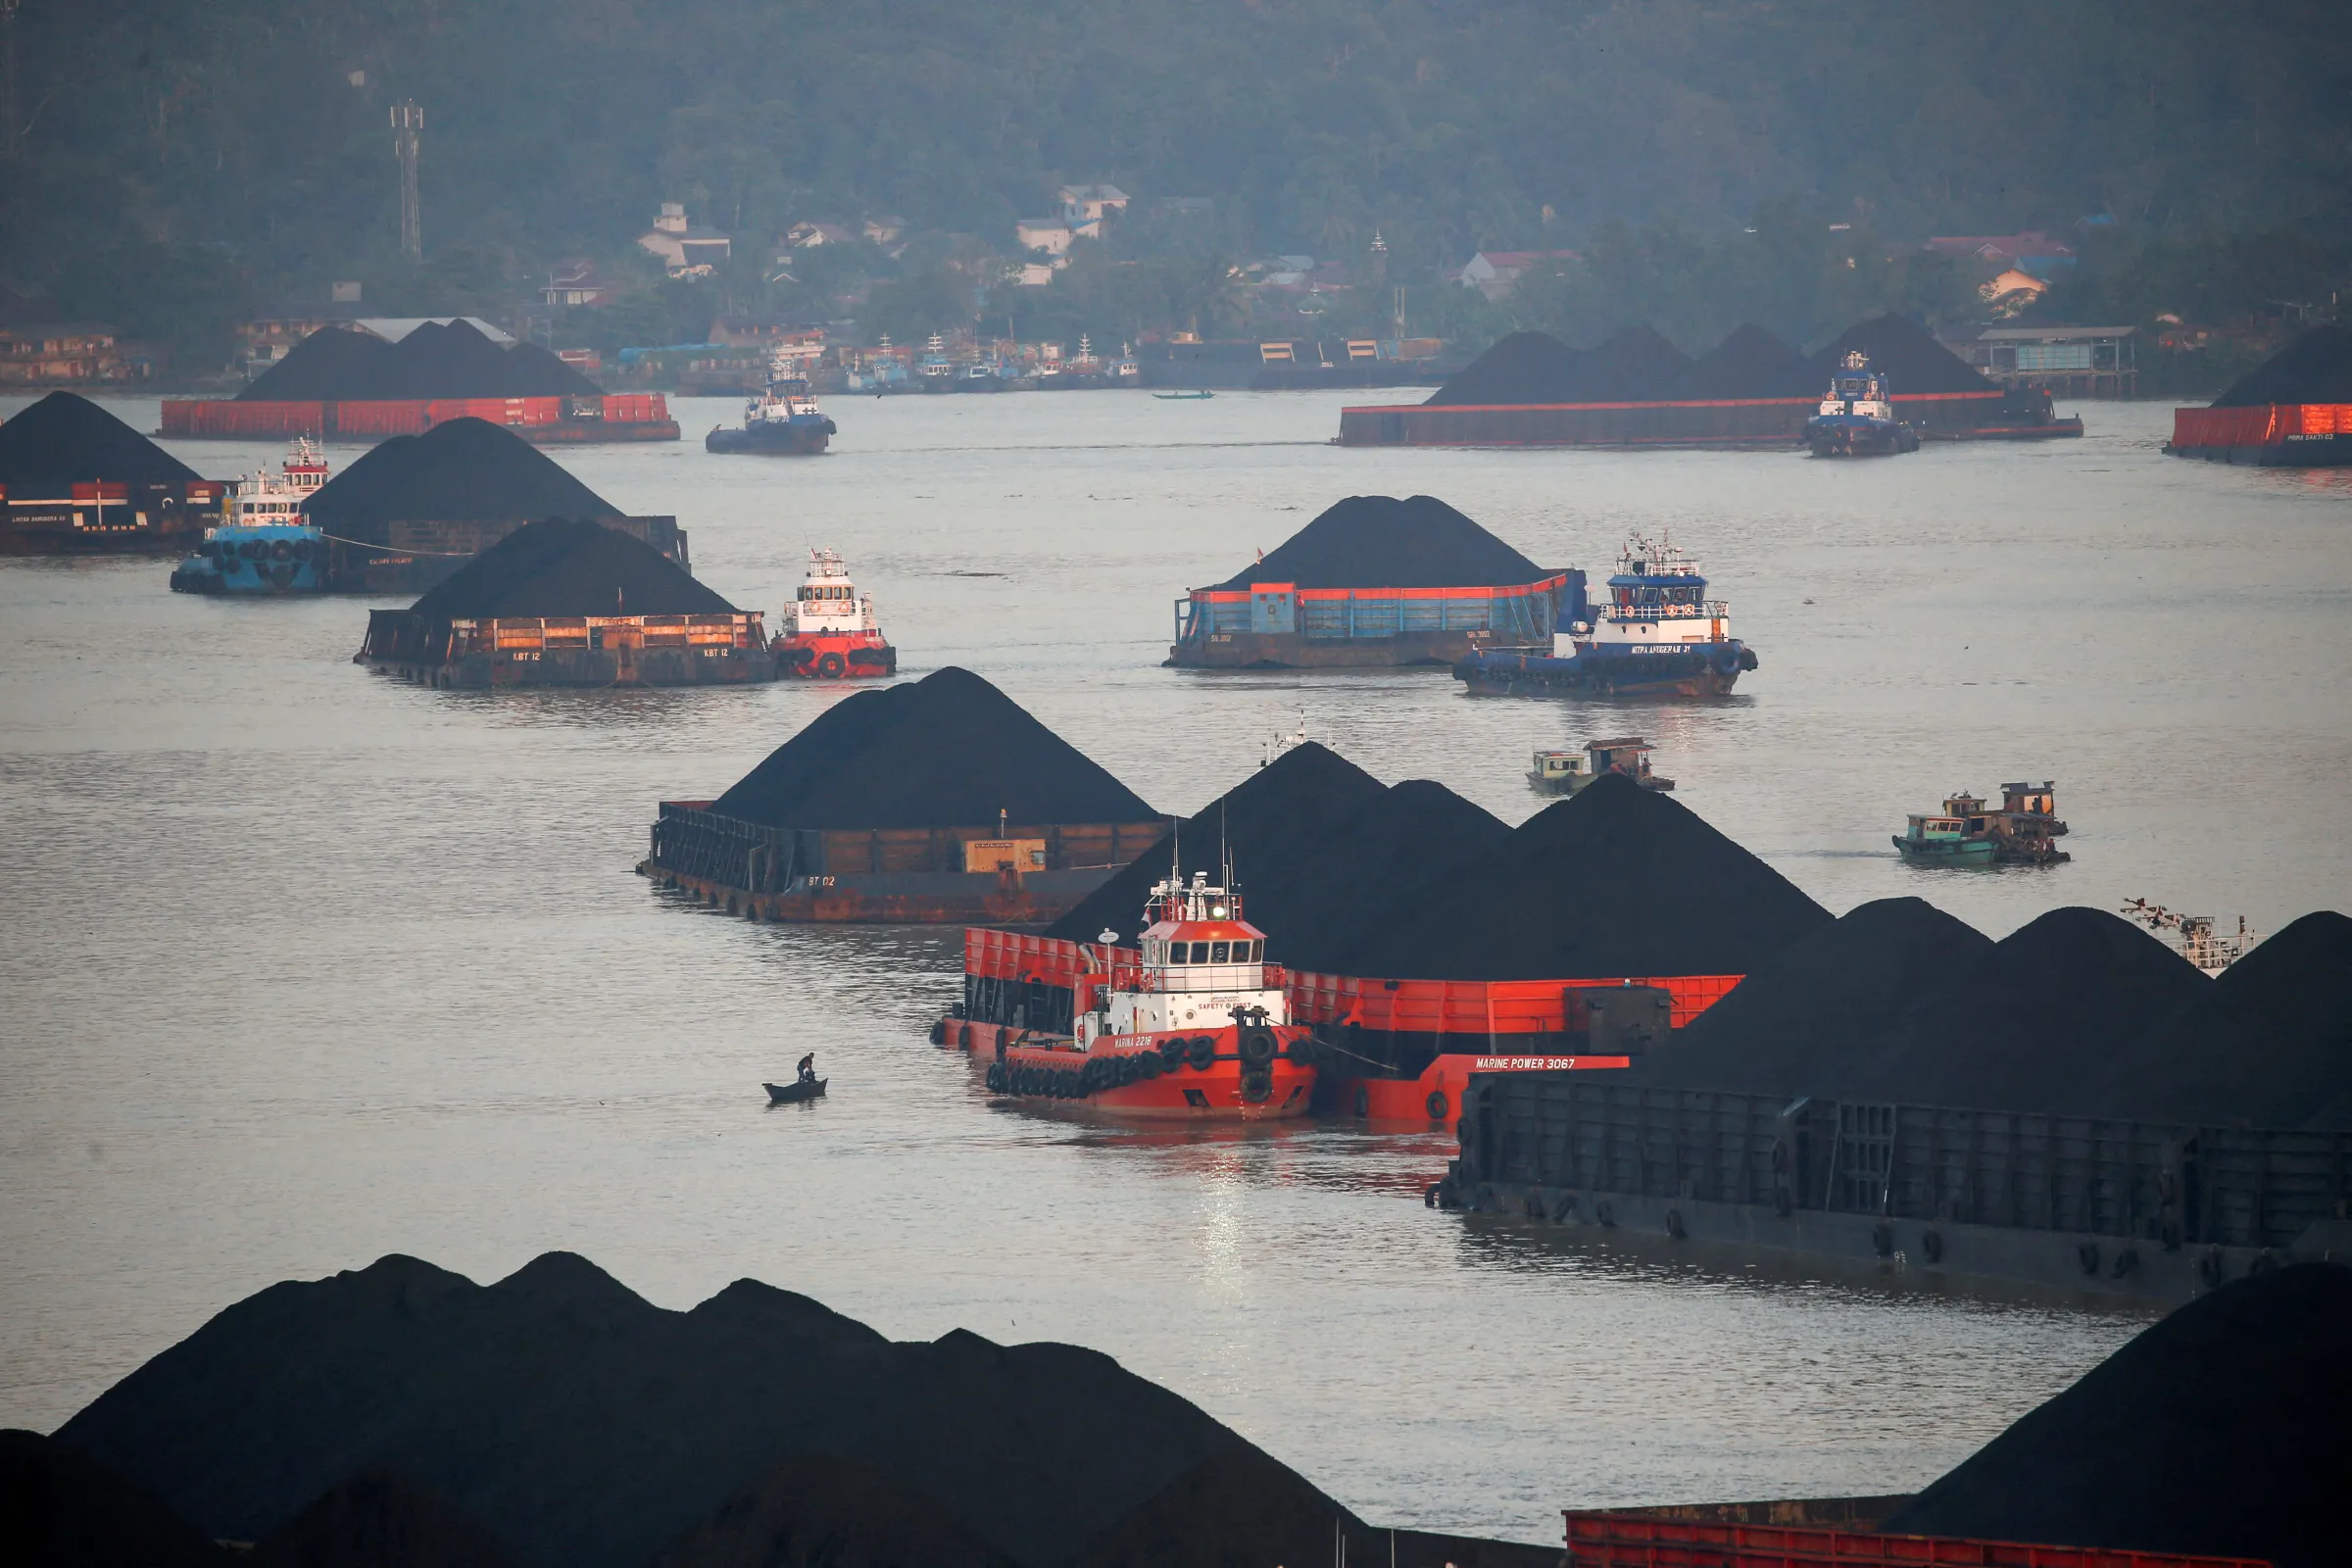 Coal barges are pictured as they queue to be pulled along Mahakam river in Samarinda, East Kalimantan province, Indonesia, August 31, 2019. REUTERS/Willy Kurniawan